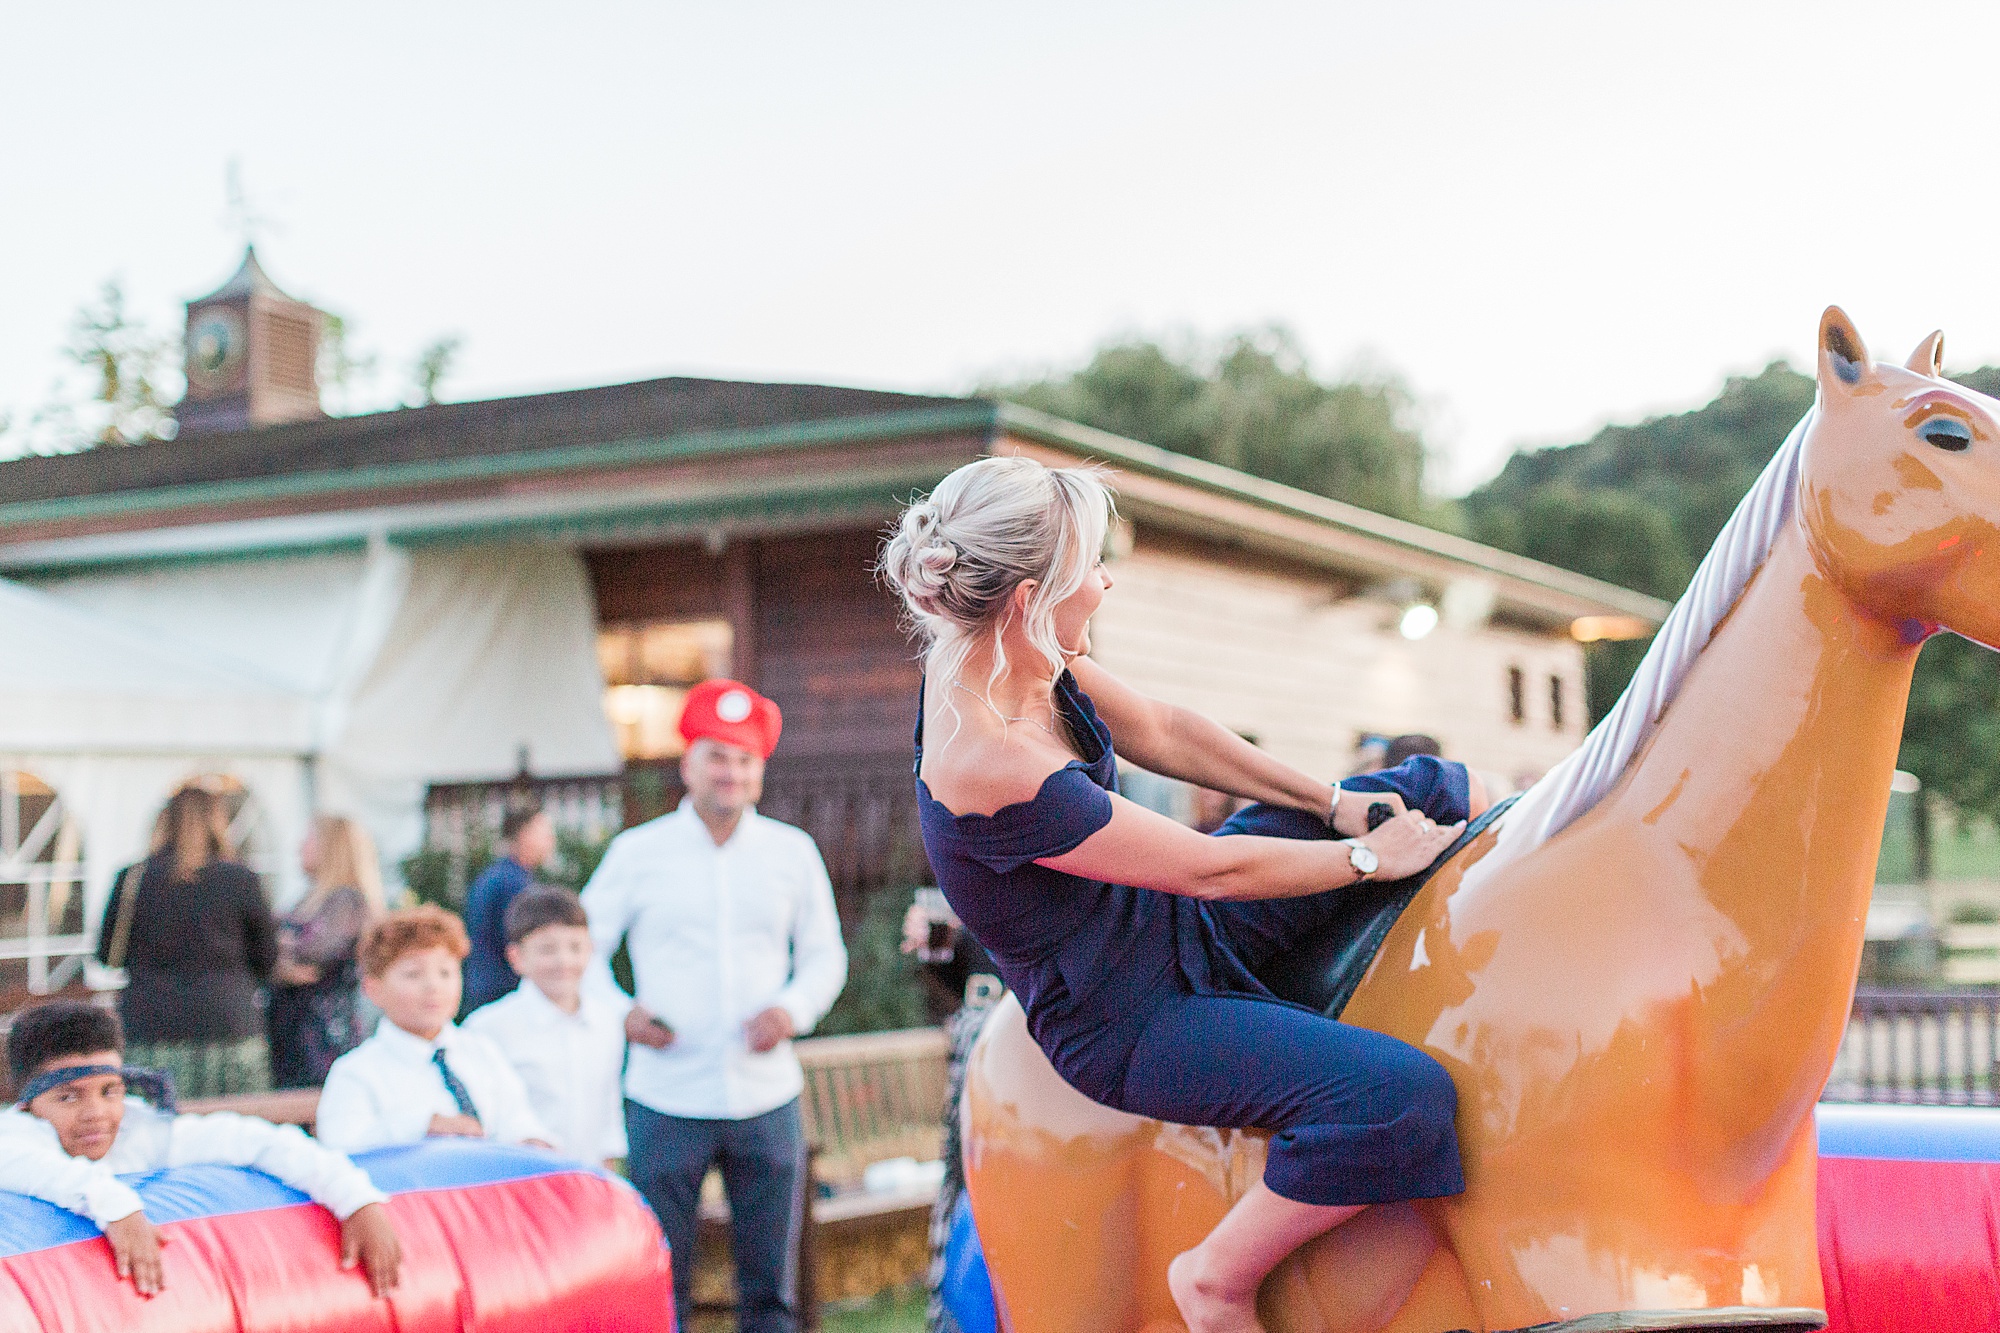 photo of a wedding guest riding a mechanical rodeo pony outside at a wedding reception with guests watching - the female guest is clinging on and half walling from the pony